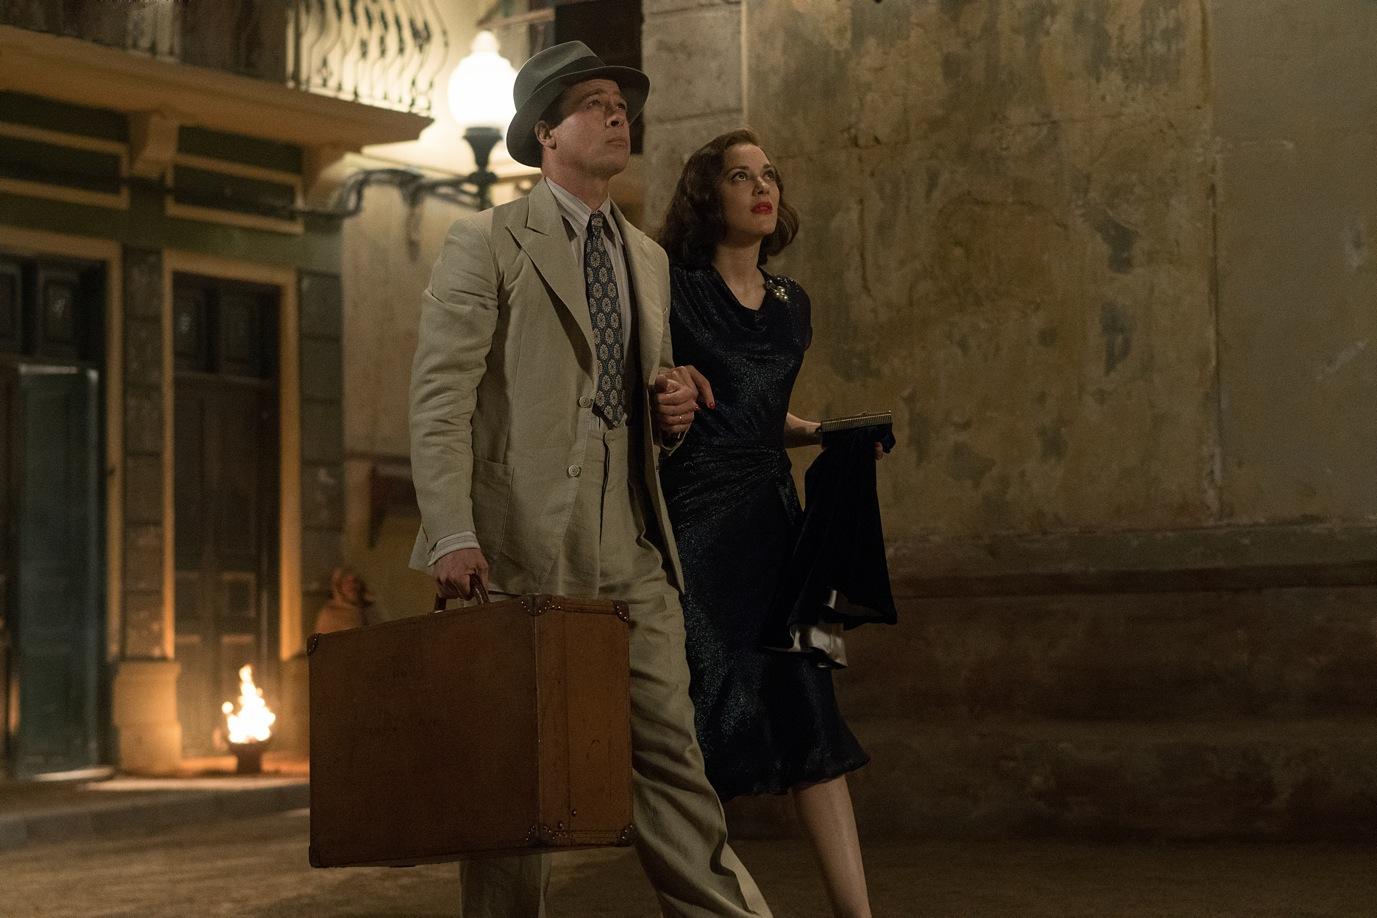 Brad Pitt plays Max Vatan and Marion Cotillard plays Marianne Beausejour in Allied from Paramount Pictures.